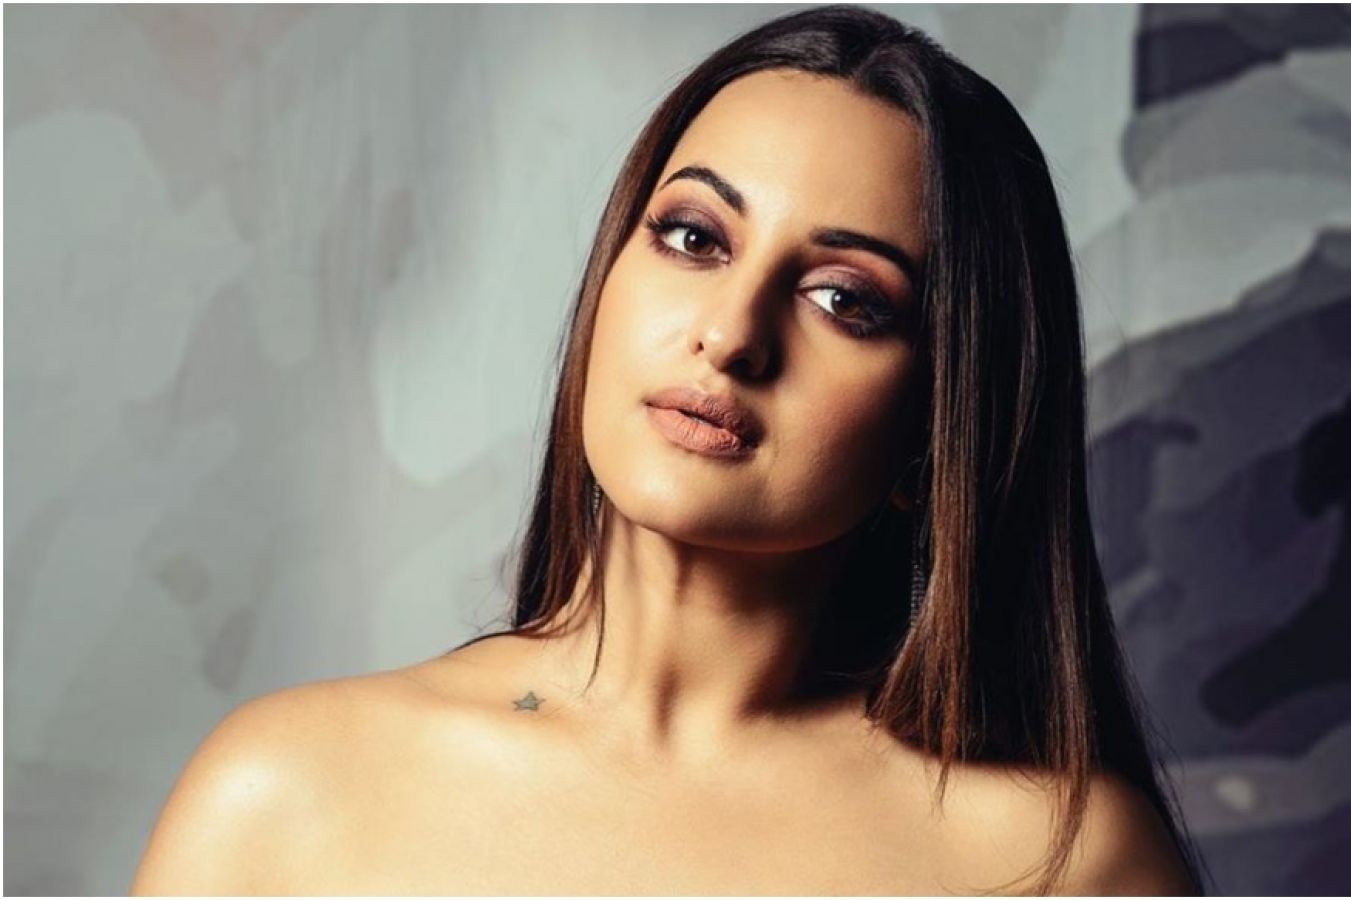 Sonakshi Sinha Ki Chodai Xxx Video - Sonakshi Sinha's is mix of sexy and sassy in golden dress, watch video here  | NewsTrack English 1